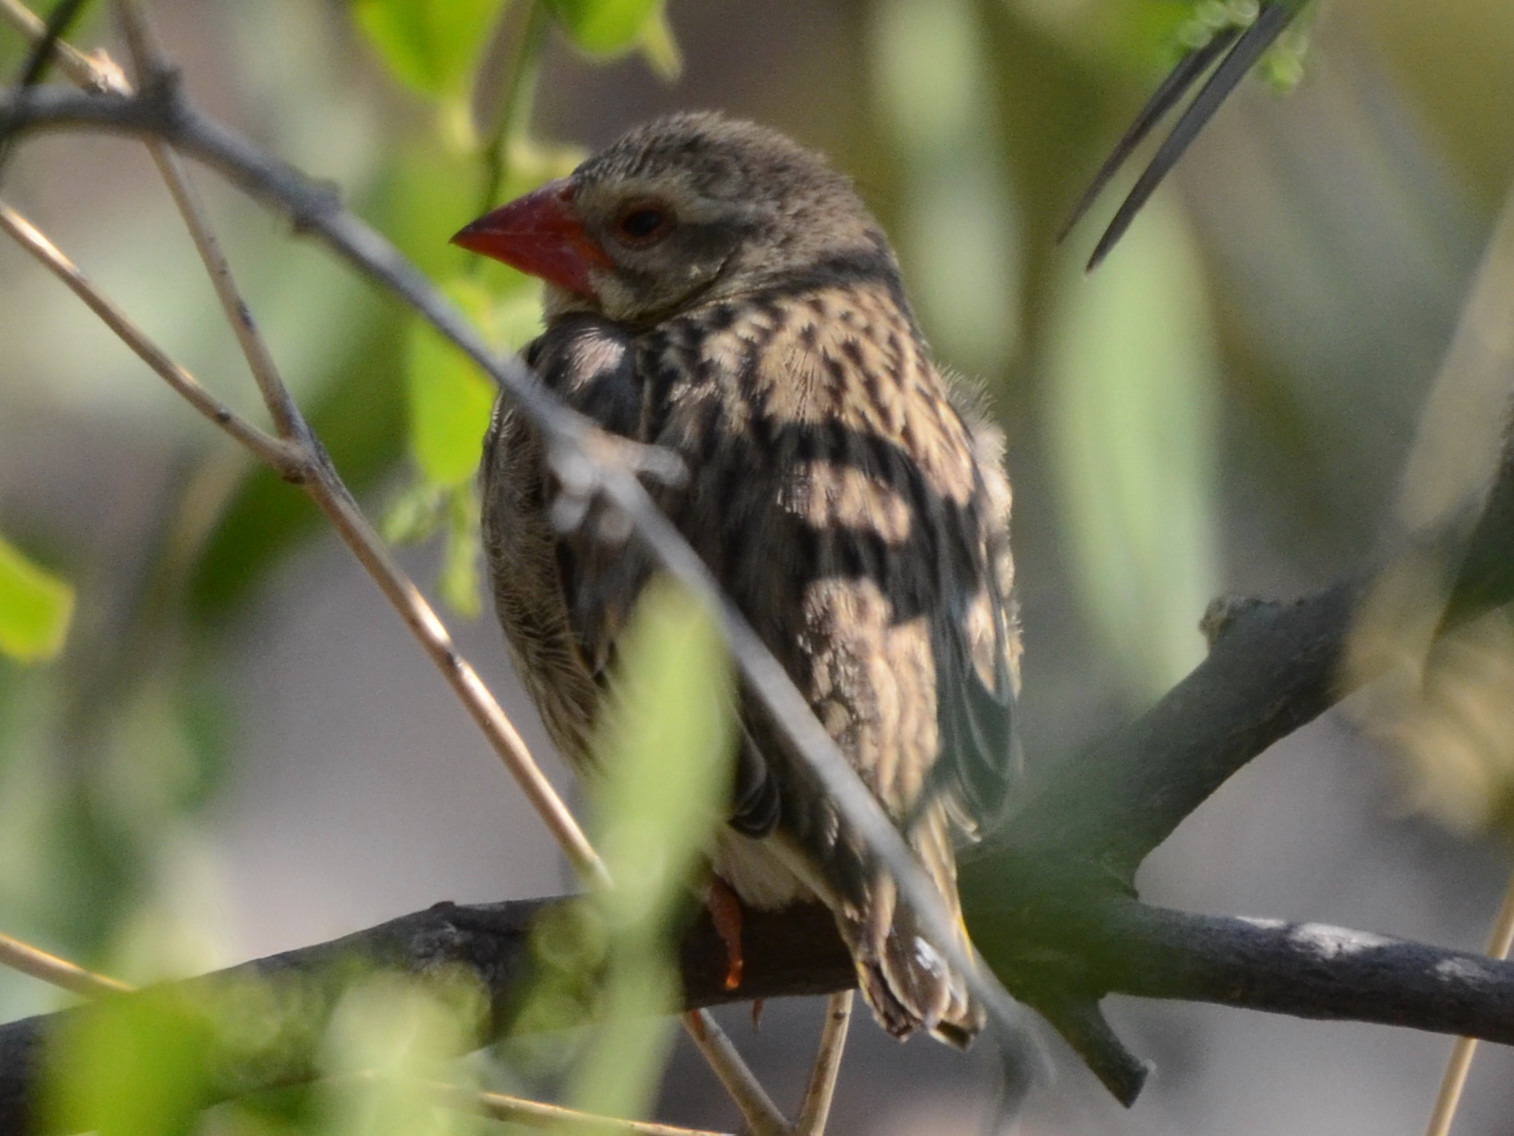 Click picture to see more Red-billed Queleas.